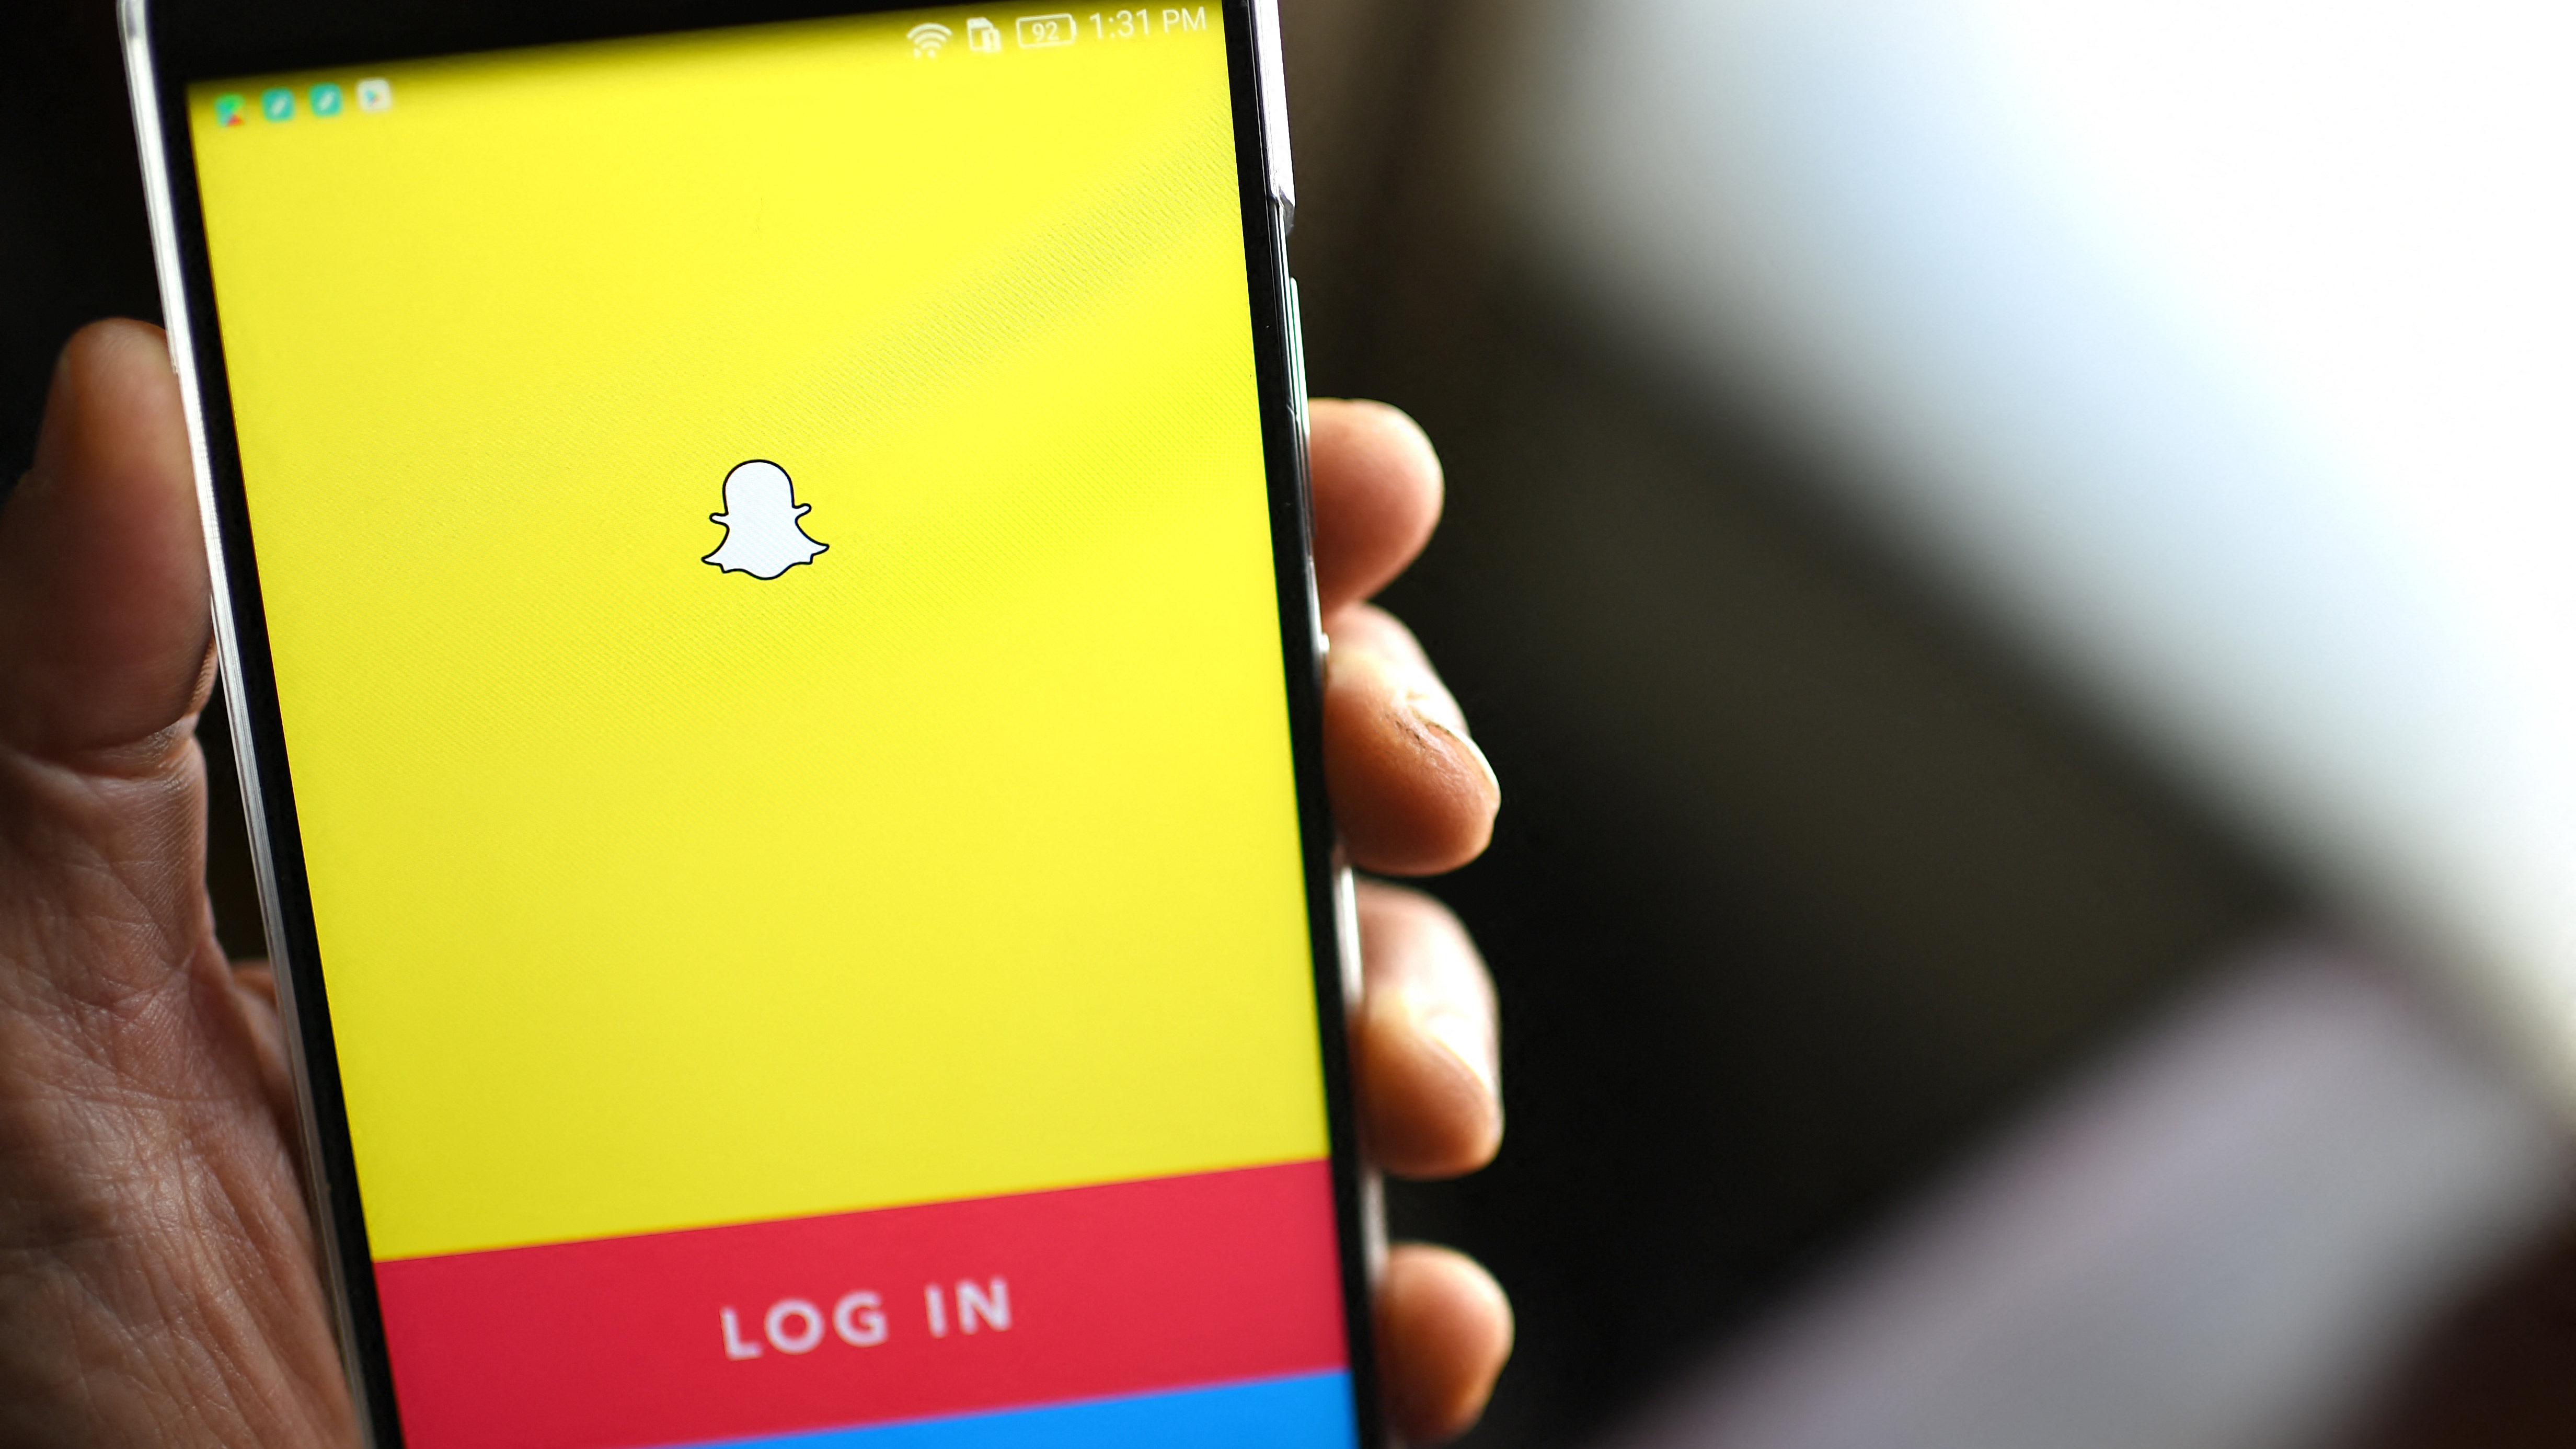 What Does Expected Mean On Snapchat? 